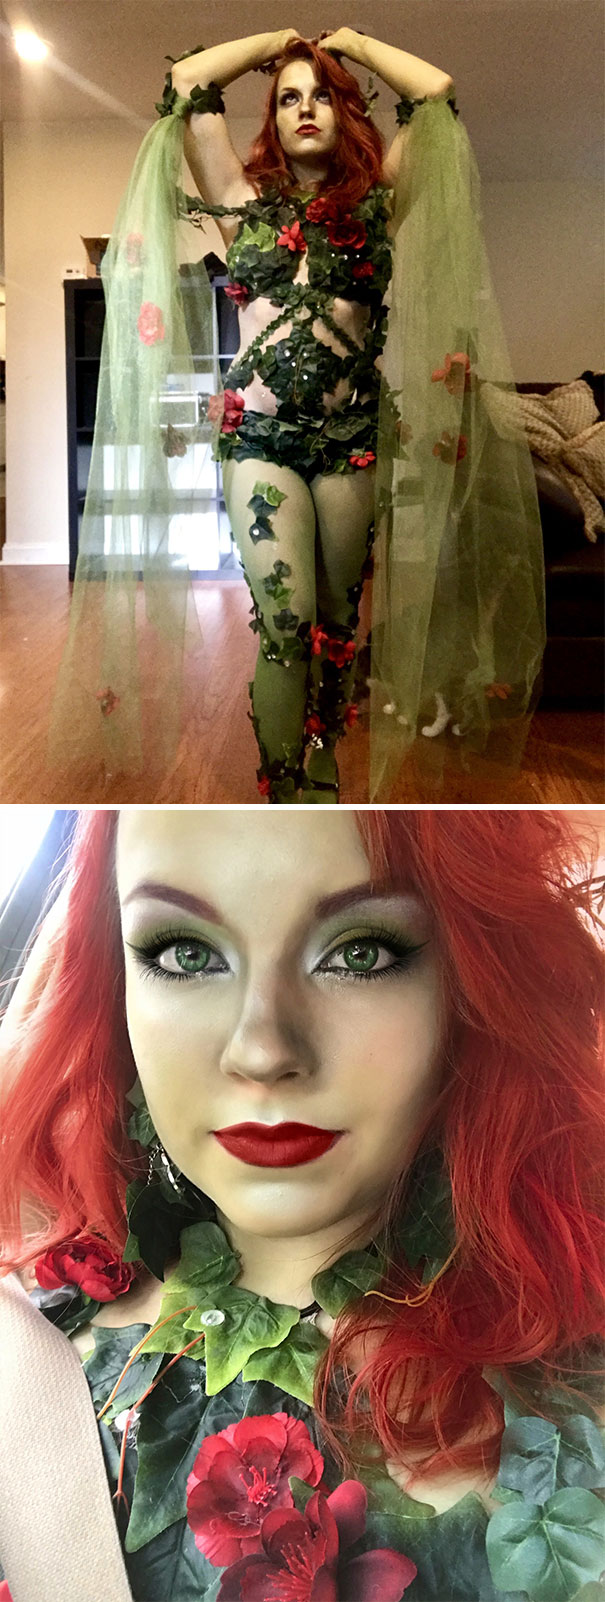 25 People Who Are Definitely Winning This Halloween